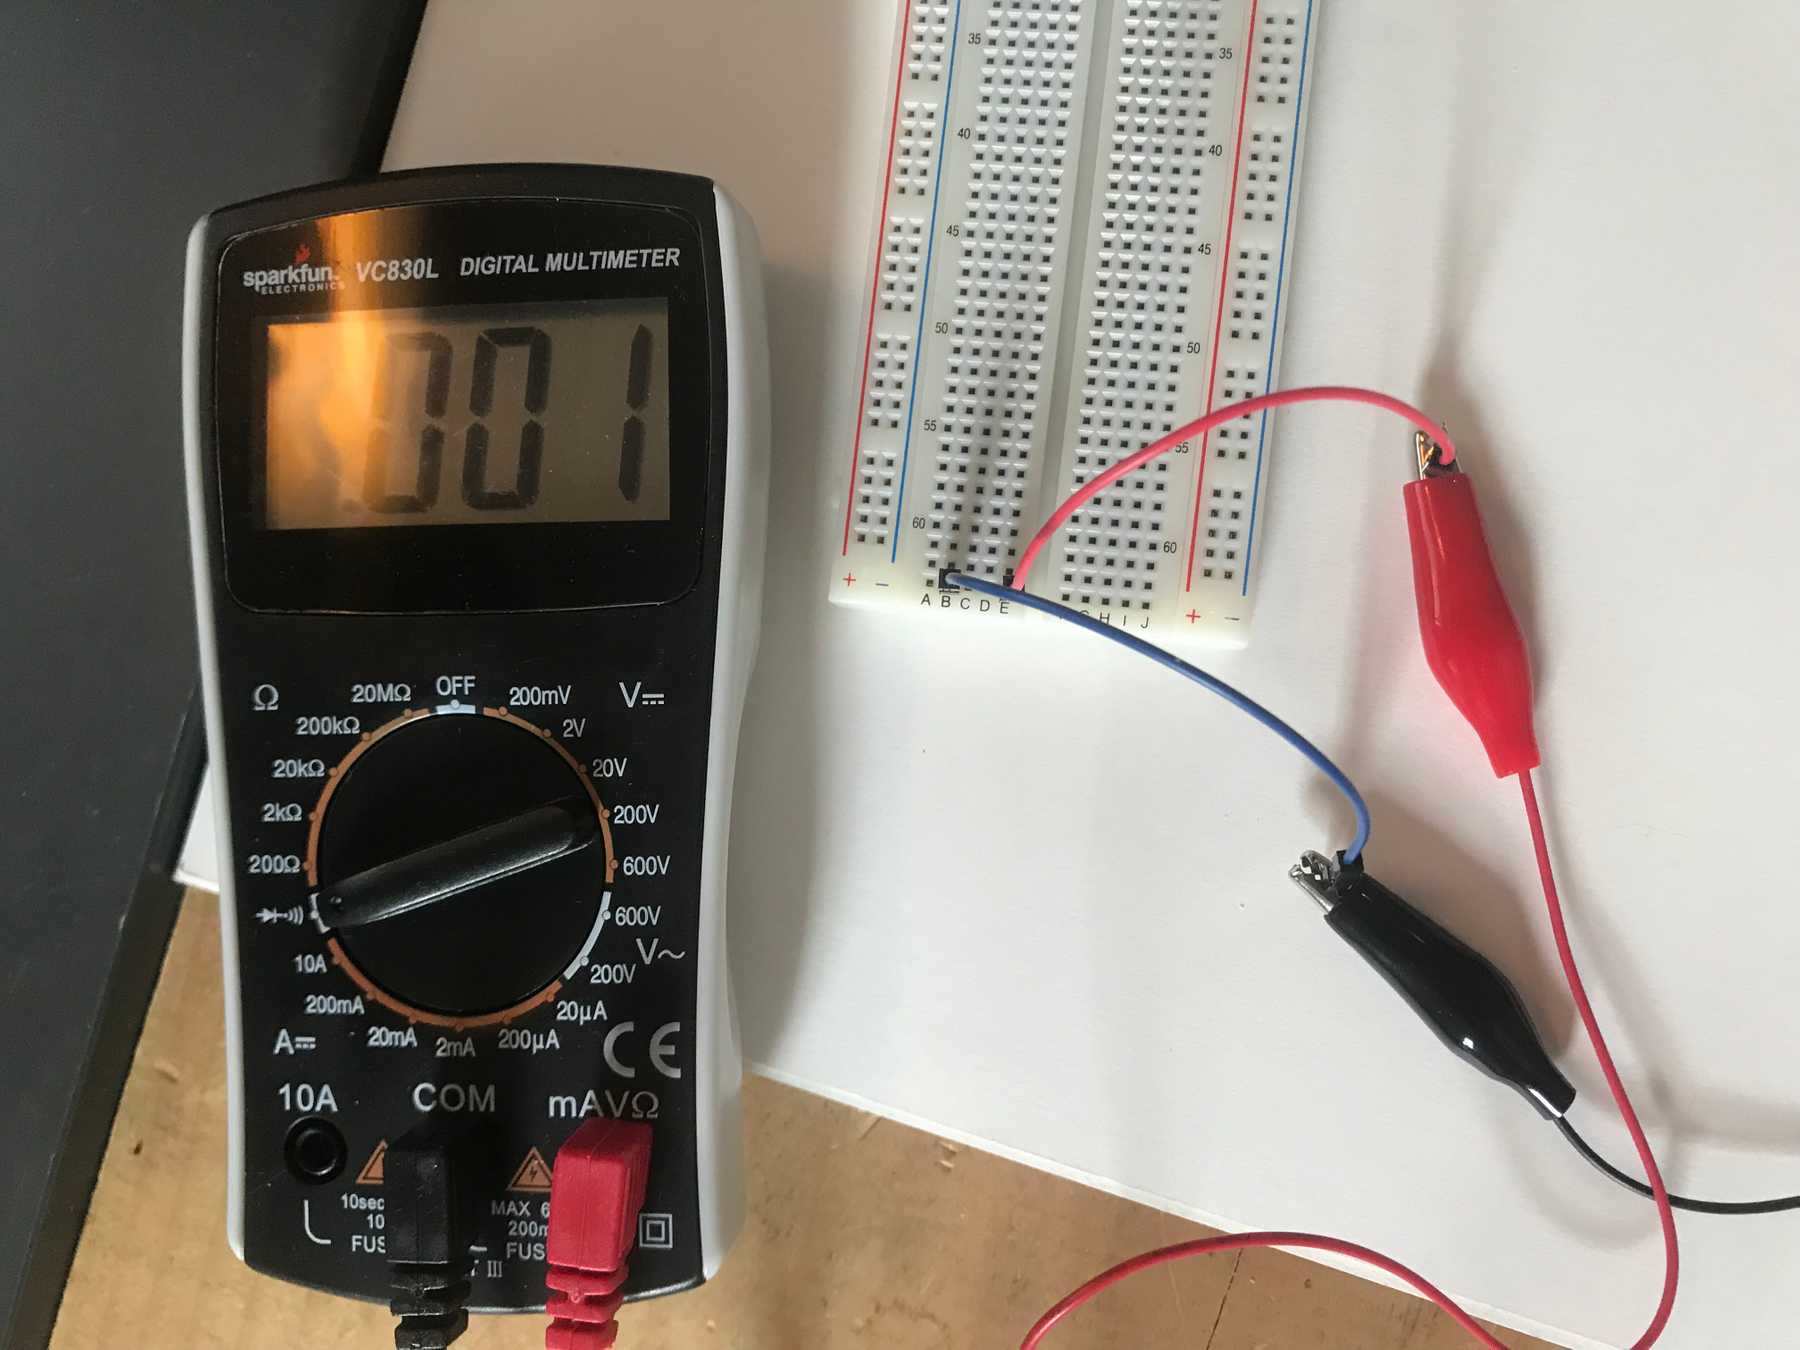 Continuous points on the breadboard